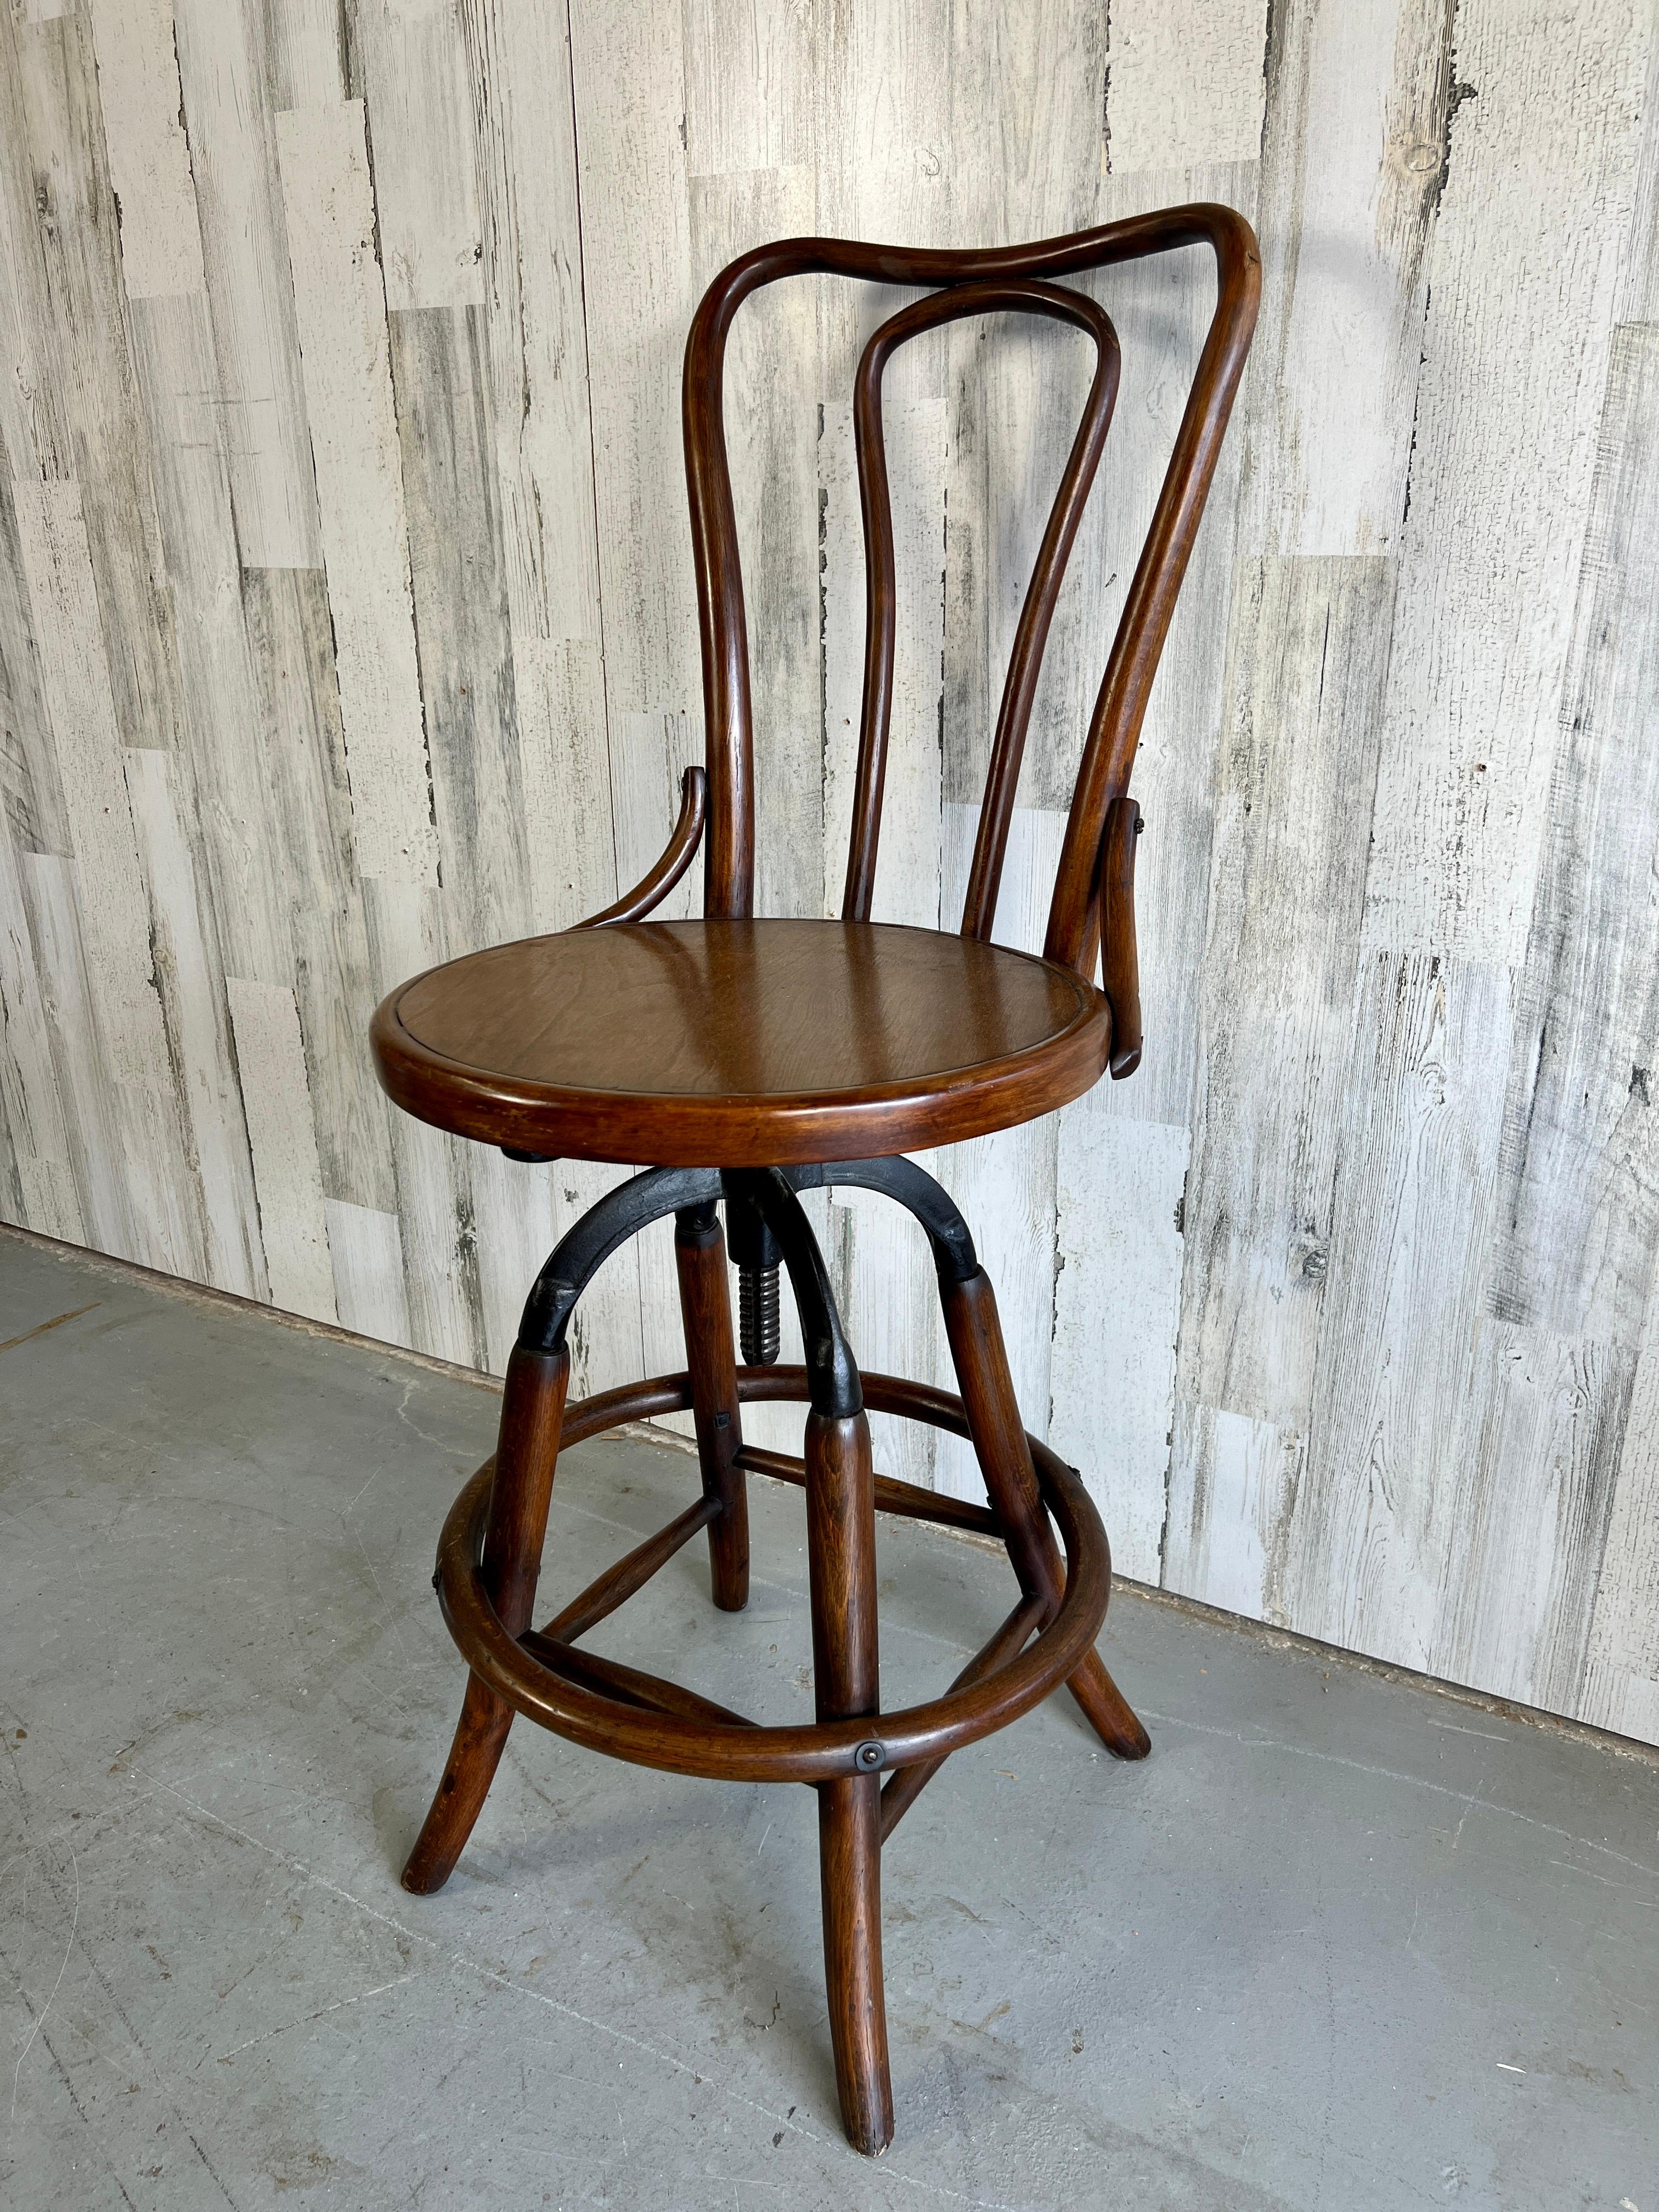 Thonet Style Switchboard Operator Bentwood Stool In Good Condition For Sale In Denton, TX